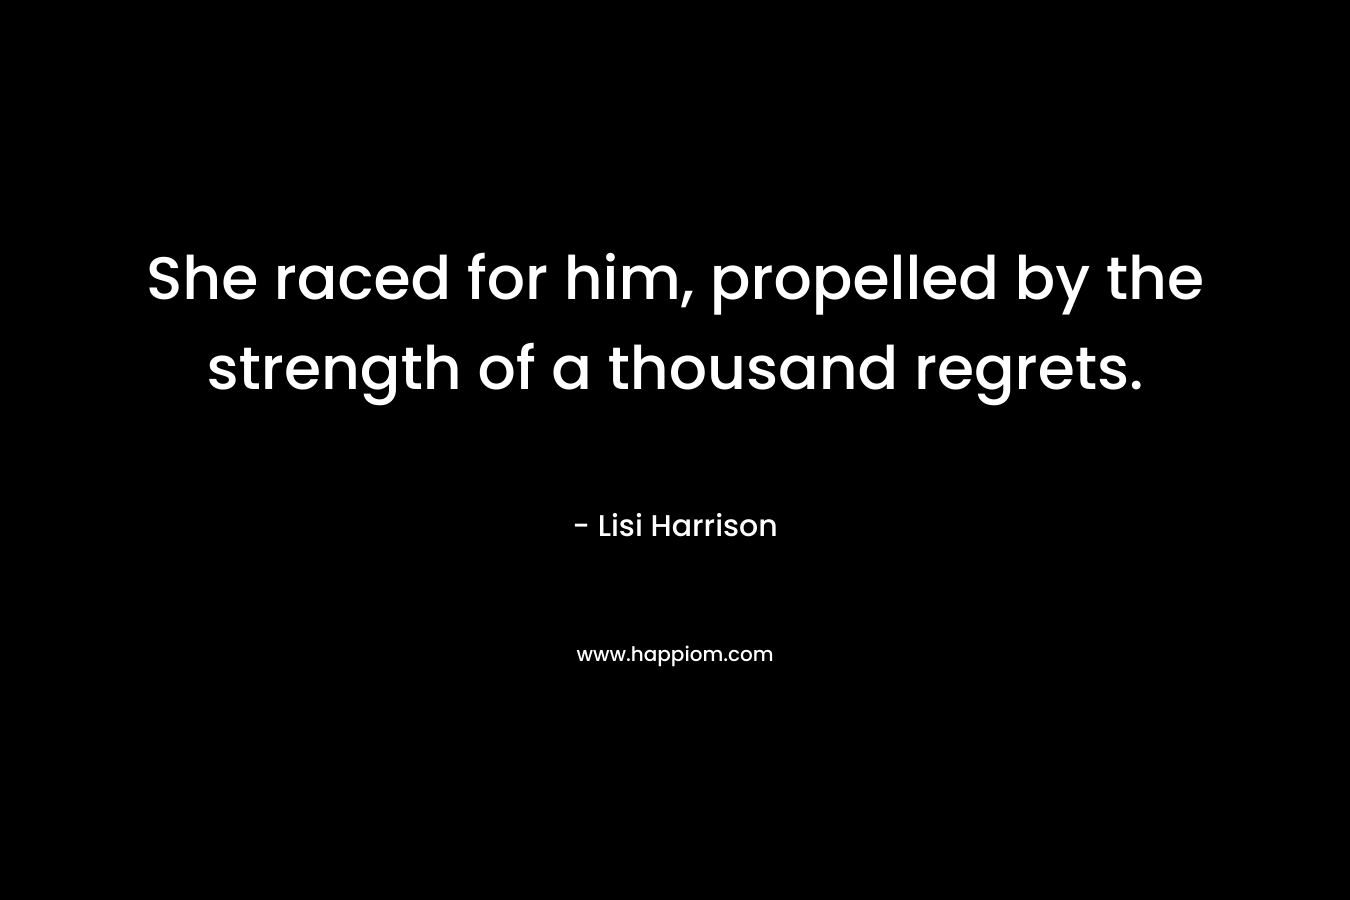 She raced for him, propelled by the strength of a thousand regrets. – Lisi Harrison